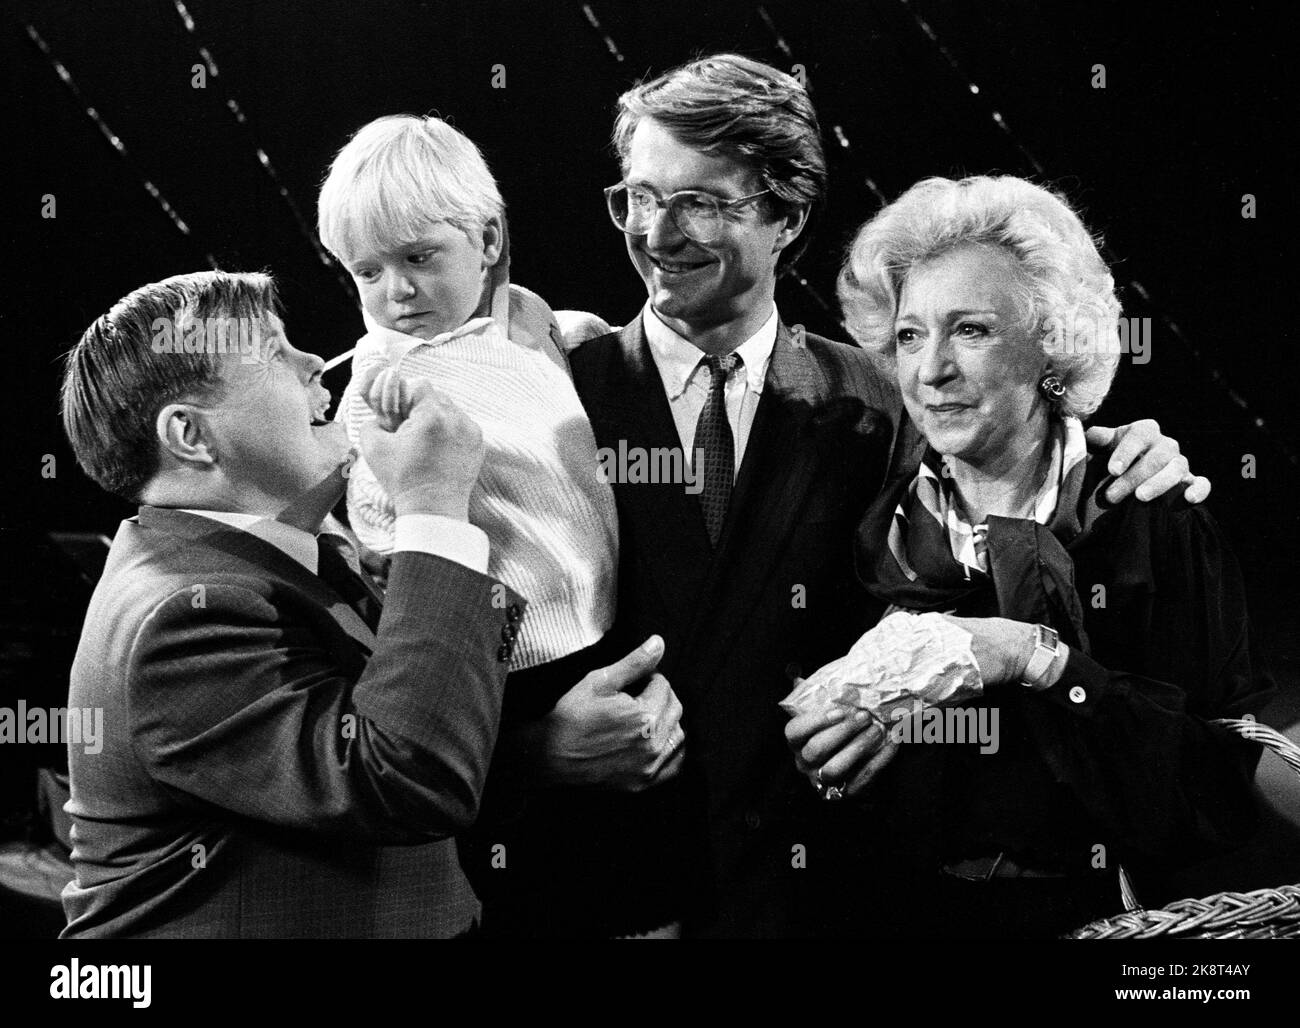 Oslo 1985-09: 'This is your life'. Actor Wenche Foss was the protagonist of Harald Tusberg's entertainment program 'This is your life' on September 29, 1985. Here Wenche Foss with his son Fabian Stang and his grandson Fabian Emil, as well as Bjørn Winther Sørensen, after the successful TV program. Photo: Henrik Laurvik Stock Photo